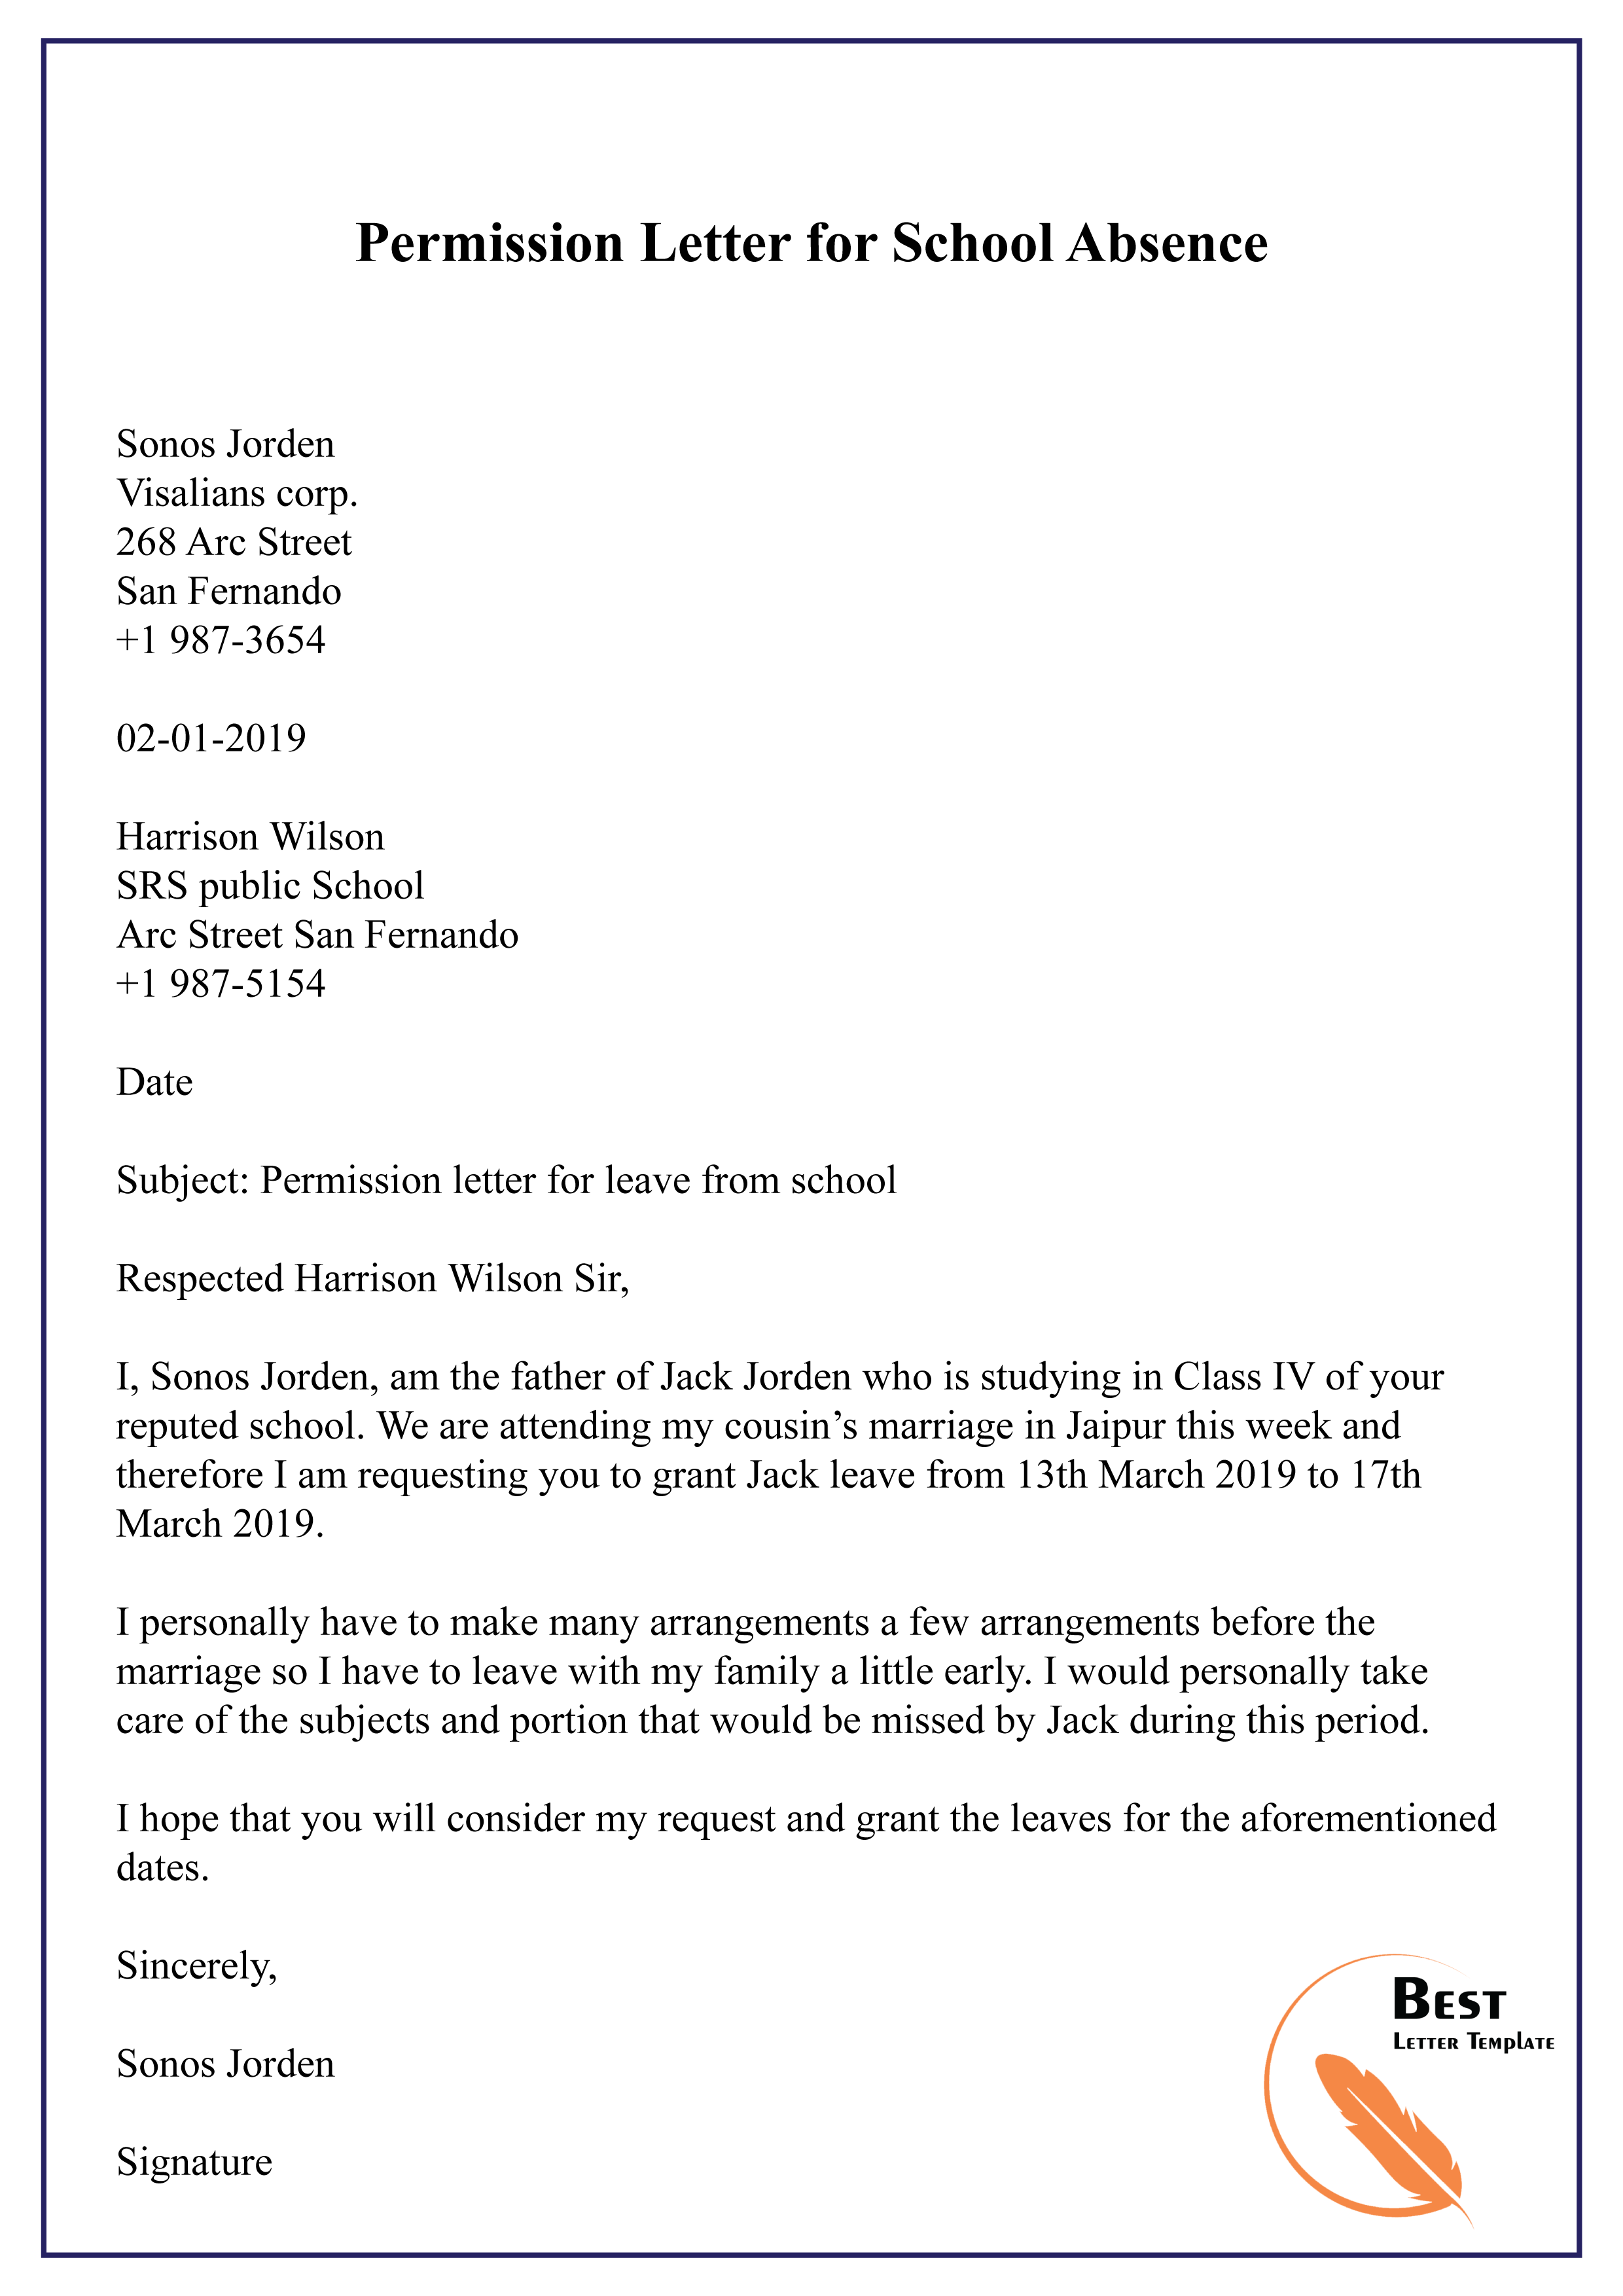 permission-letter-for-school-absence-01-best-letter-template